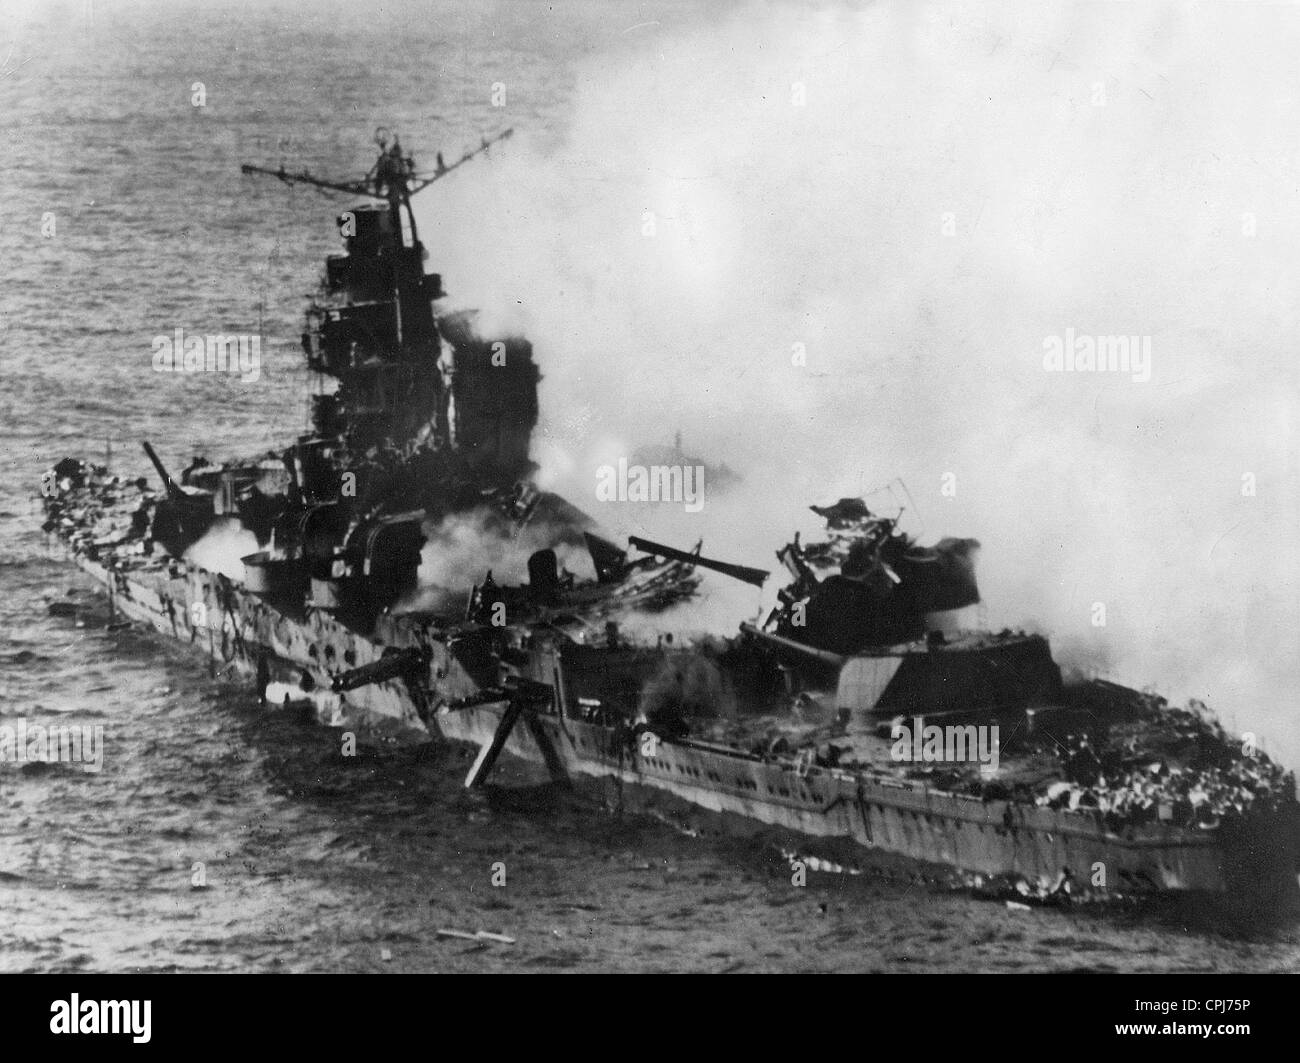 Japanese Cruiser at the The Battle of Midway, 1942 (b/w photo) Stock Photo